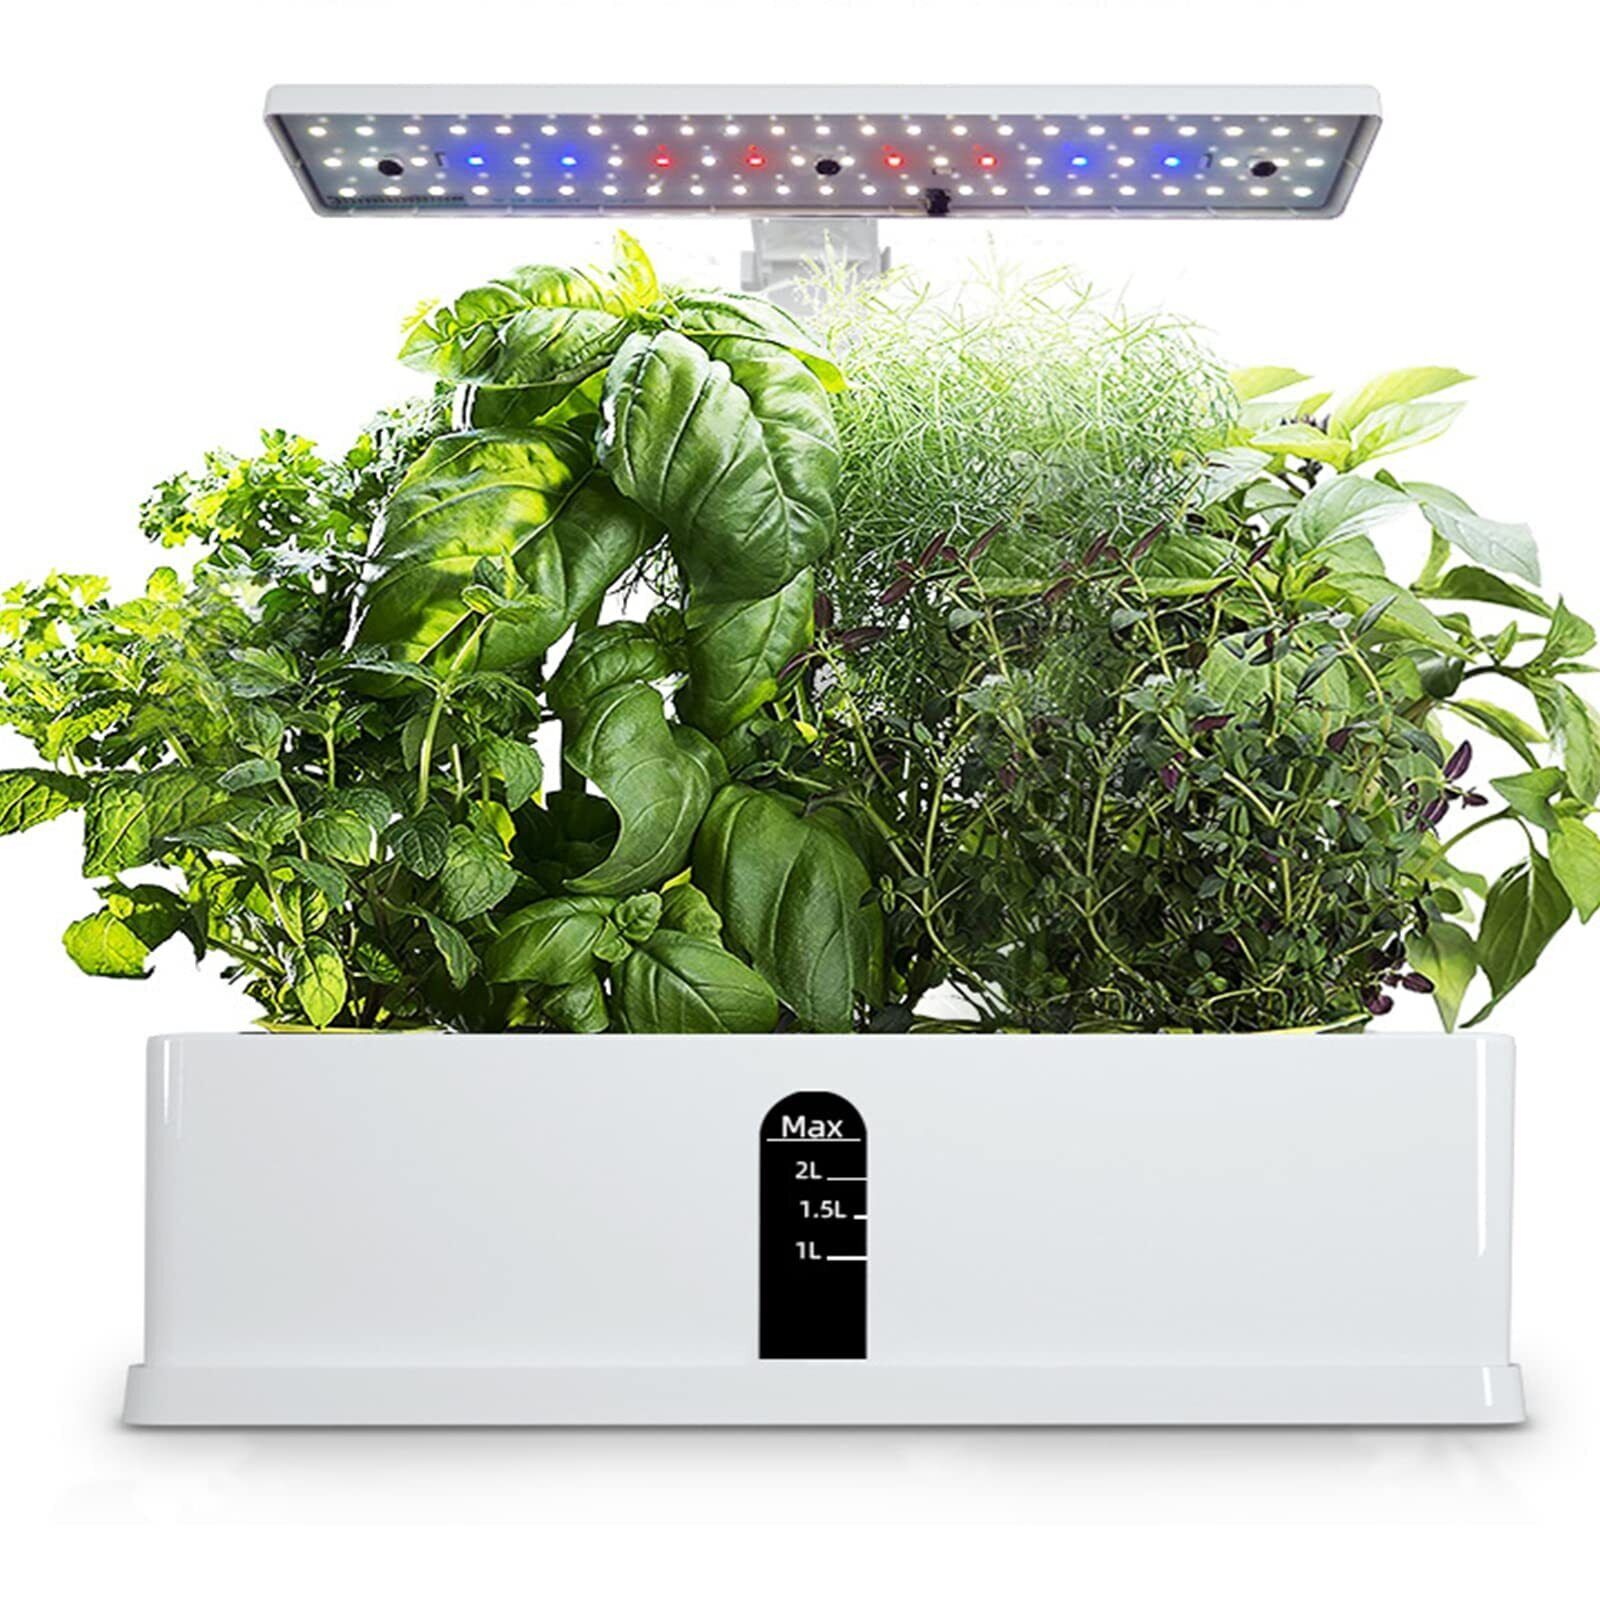 Hydroponics Growing System, 9 Pods Indoor Gardening System,with LED Grow Lights